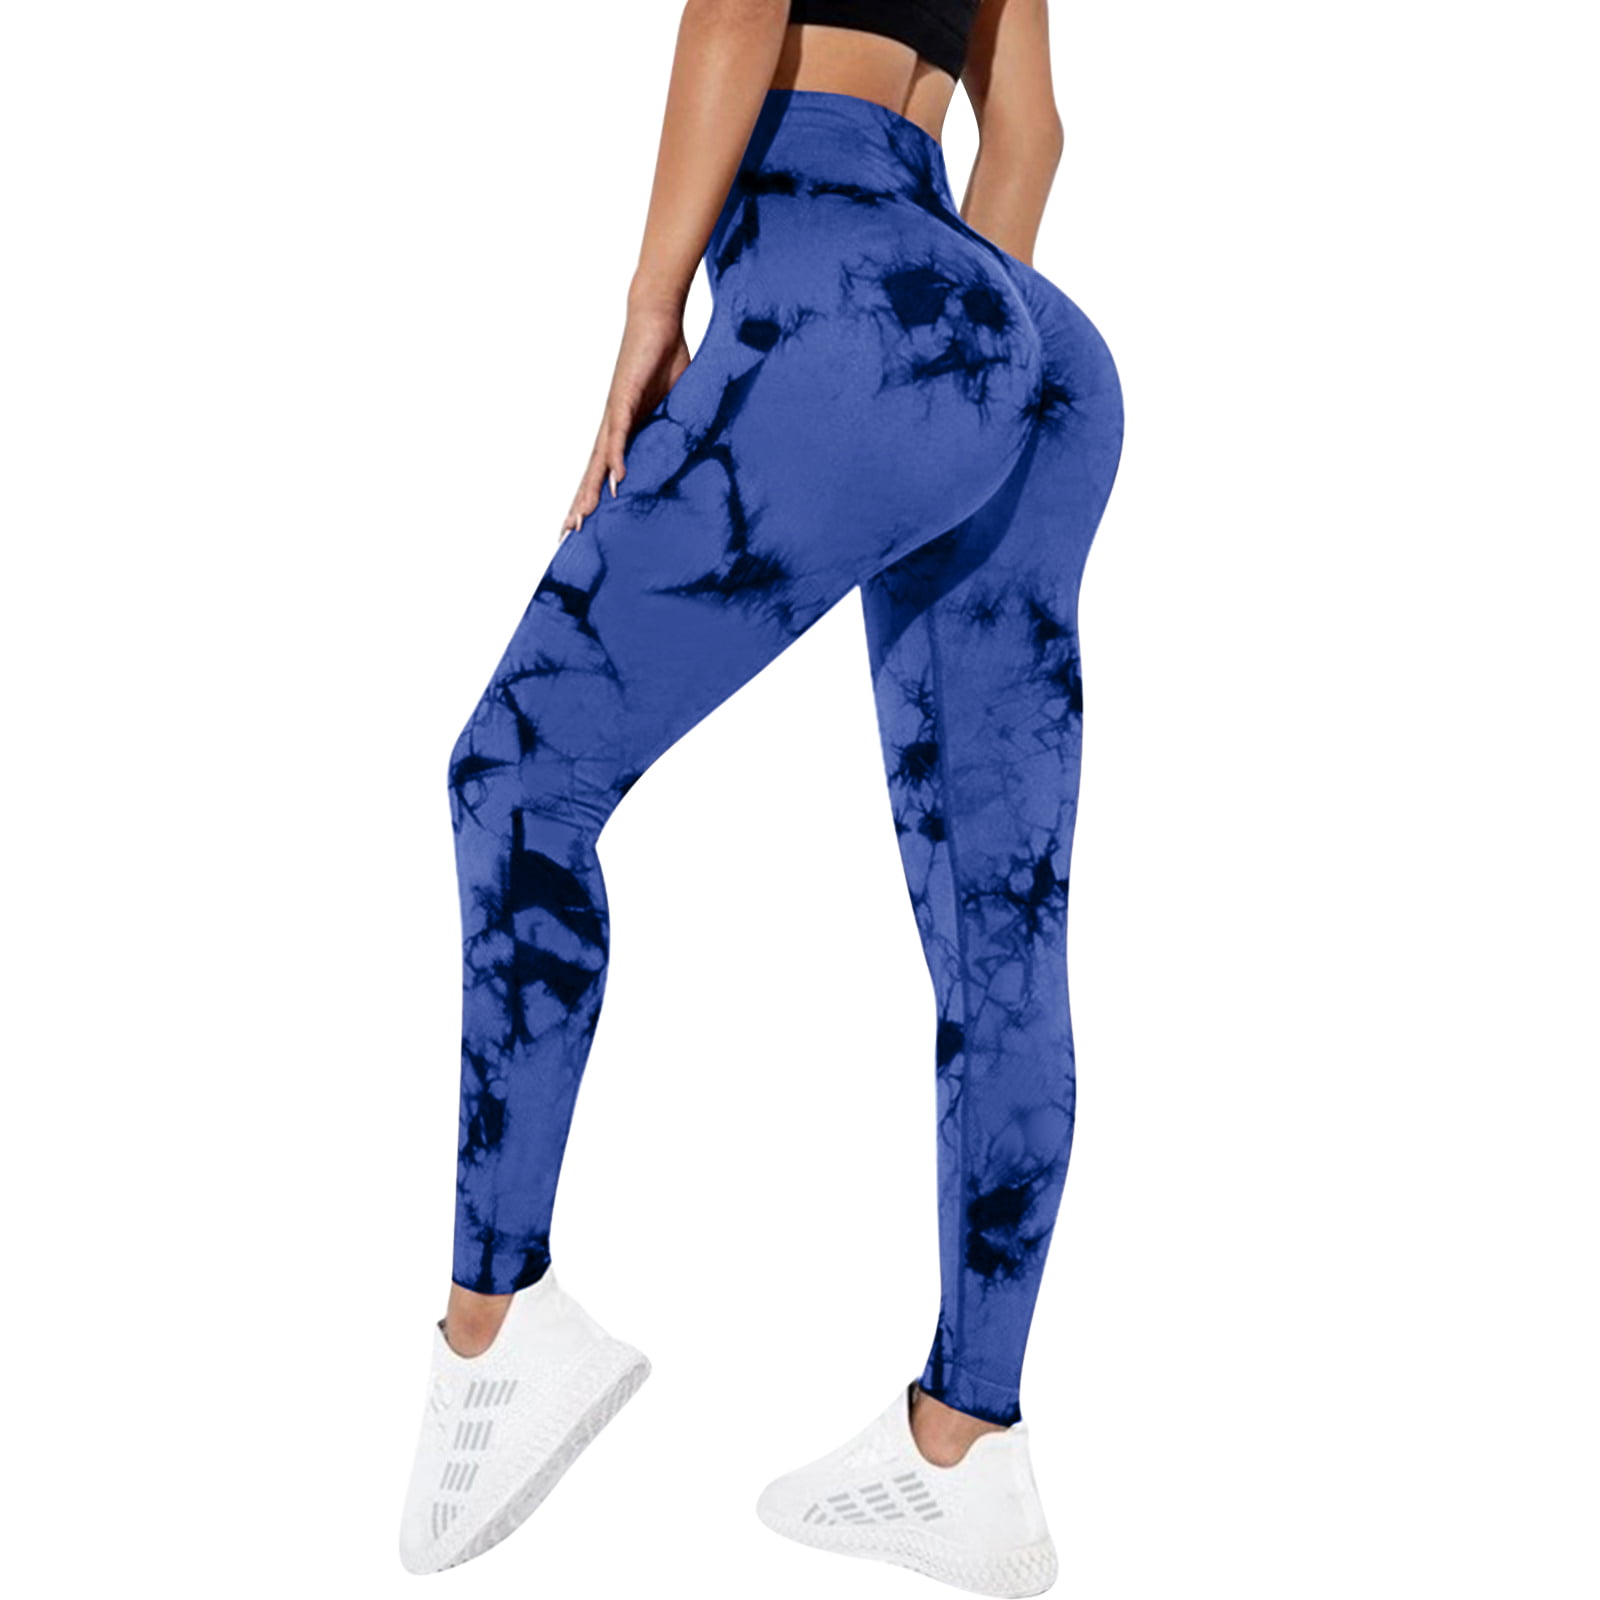 High Waist Tie Dye Tie Dye Gym Leggings For Women Stretchy, Athletic, And  Sexy Yoga Pants For Gym And Fitness From Peanutoil, $12.77